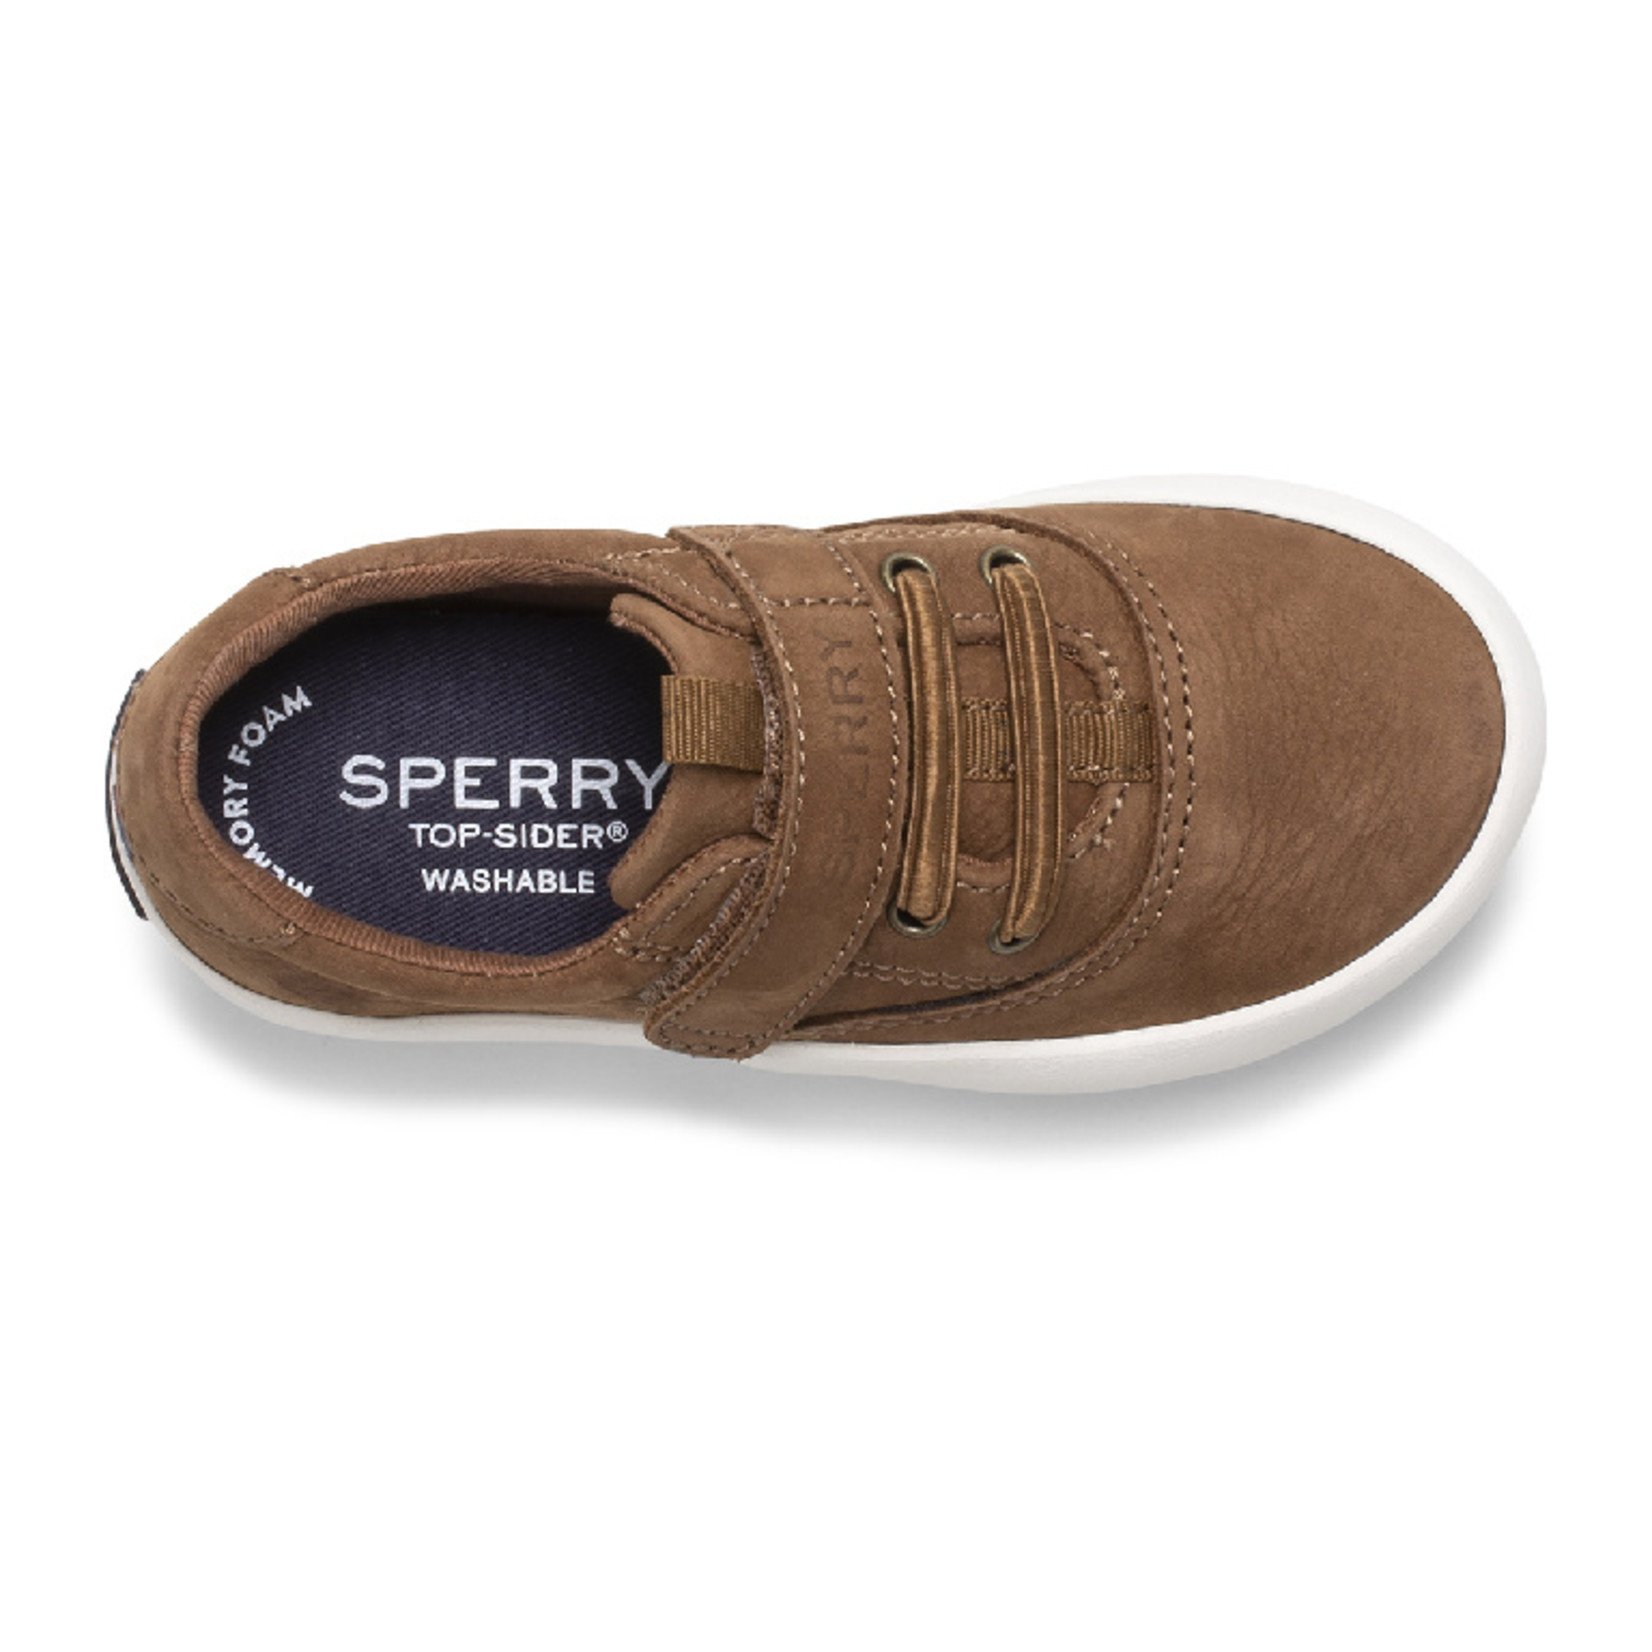 Sperry Sperry Spinnaker Washable Jr.